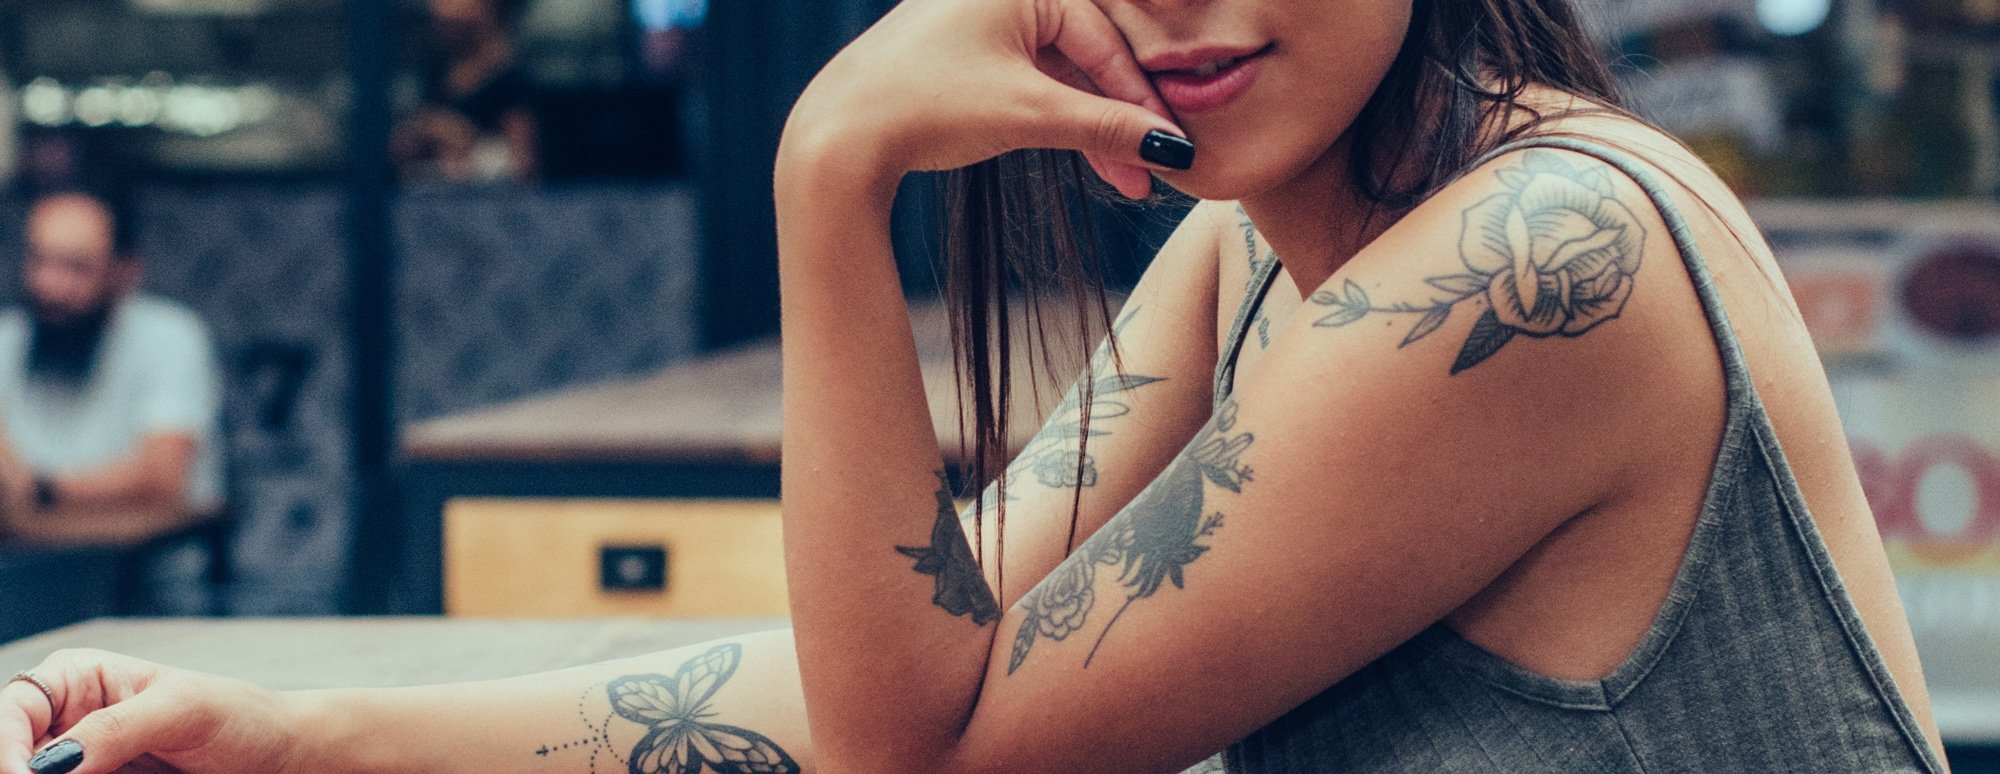 This Is What Happens to Your Body When You Get a Tattoo - Glo Skin Beauty